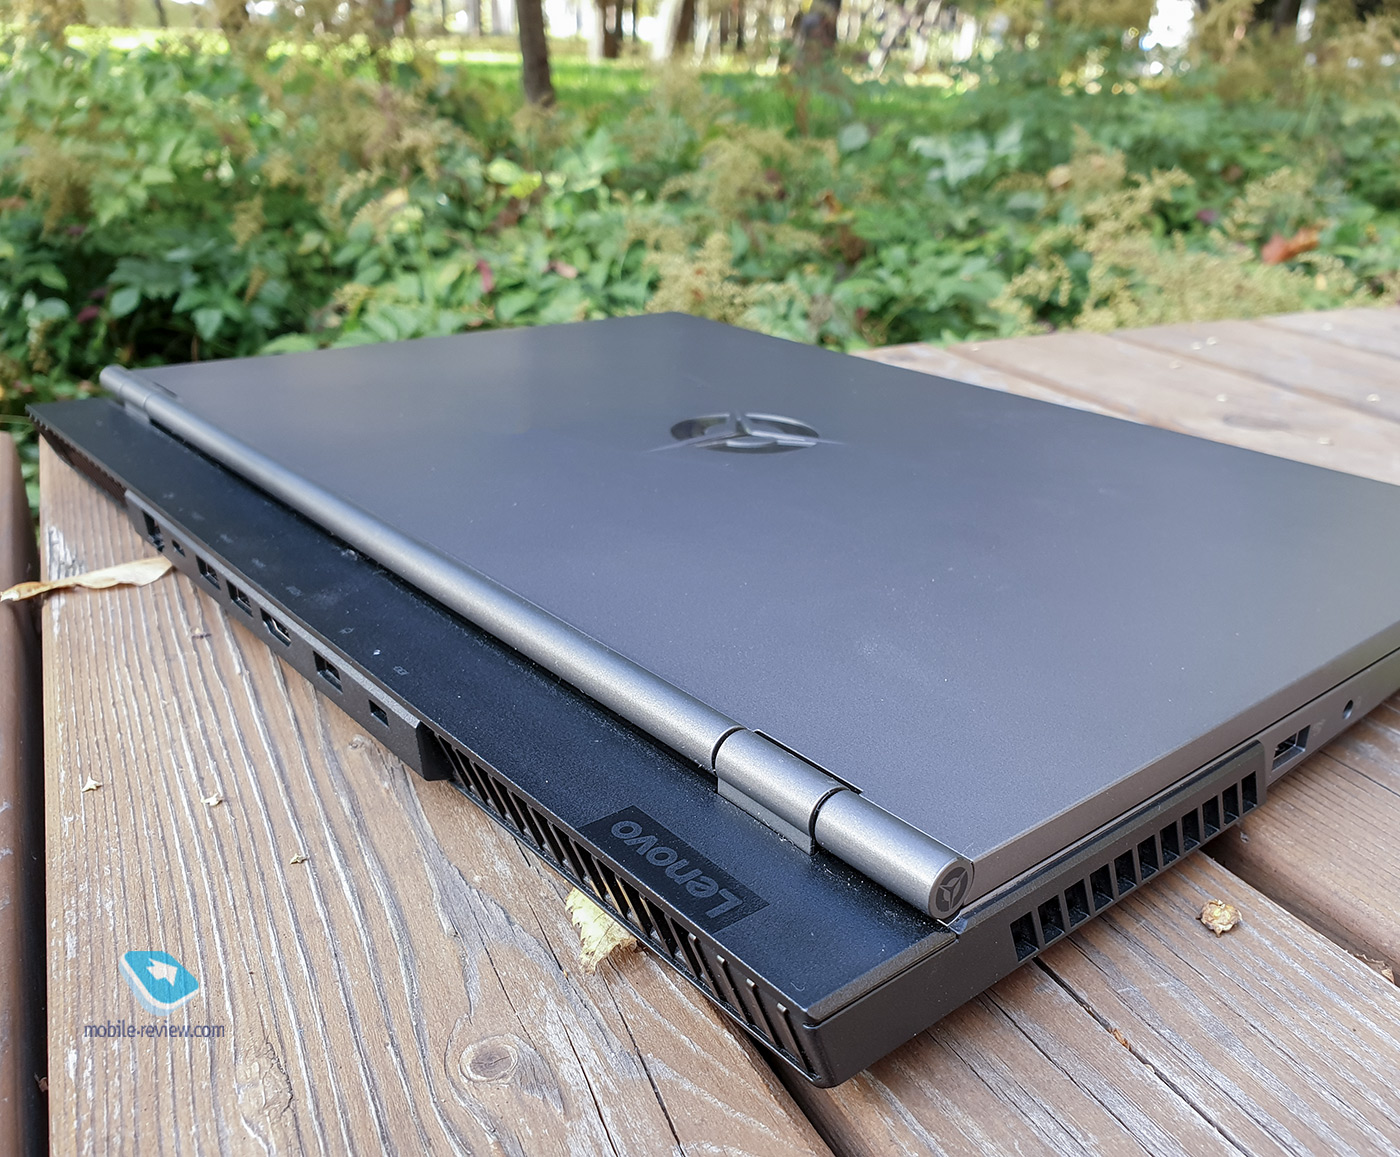 Lenovo Legion 5P: an affordable gaming laptop for work